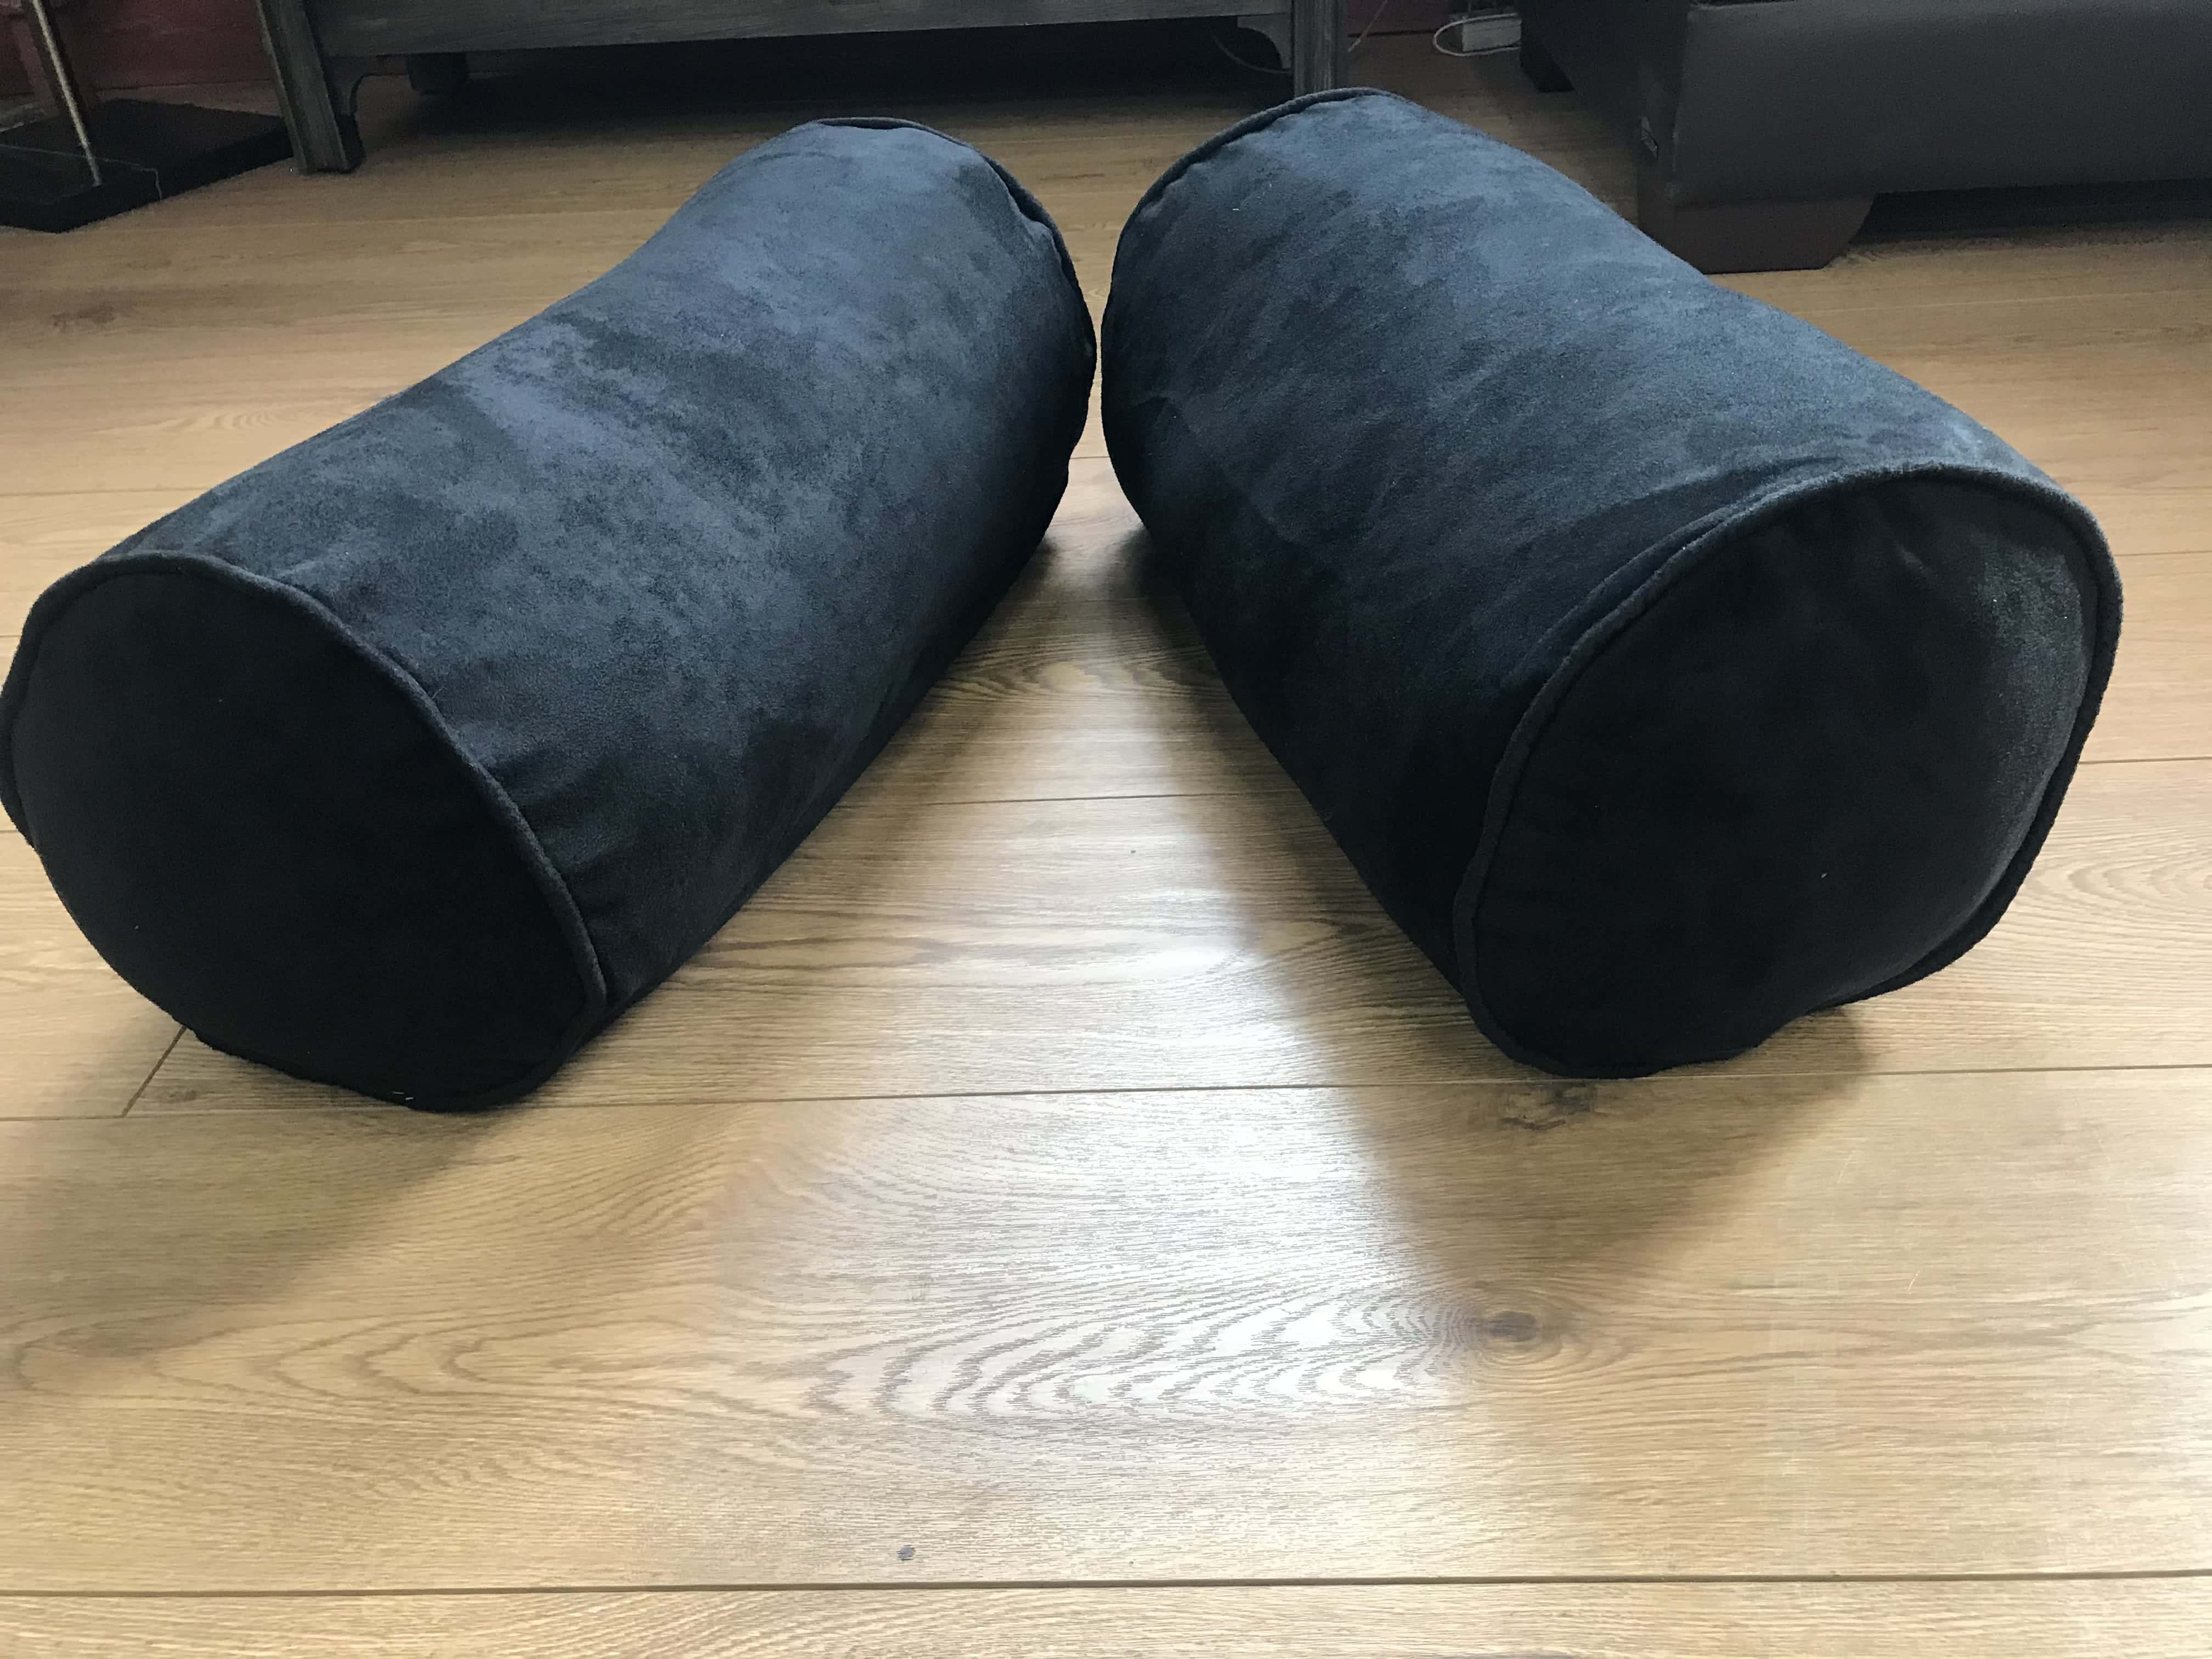 Suede Black Bolster Pillows 9x20 w/Piping (Set of 2) at Futonland